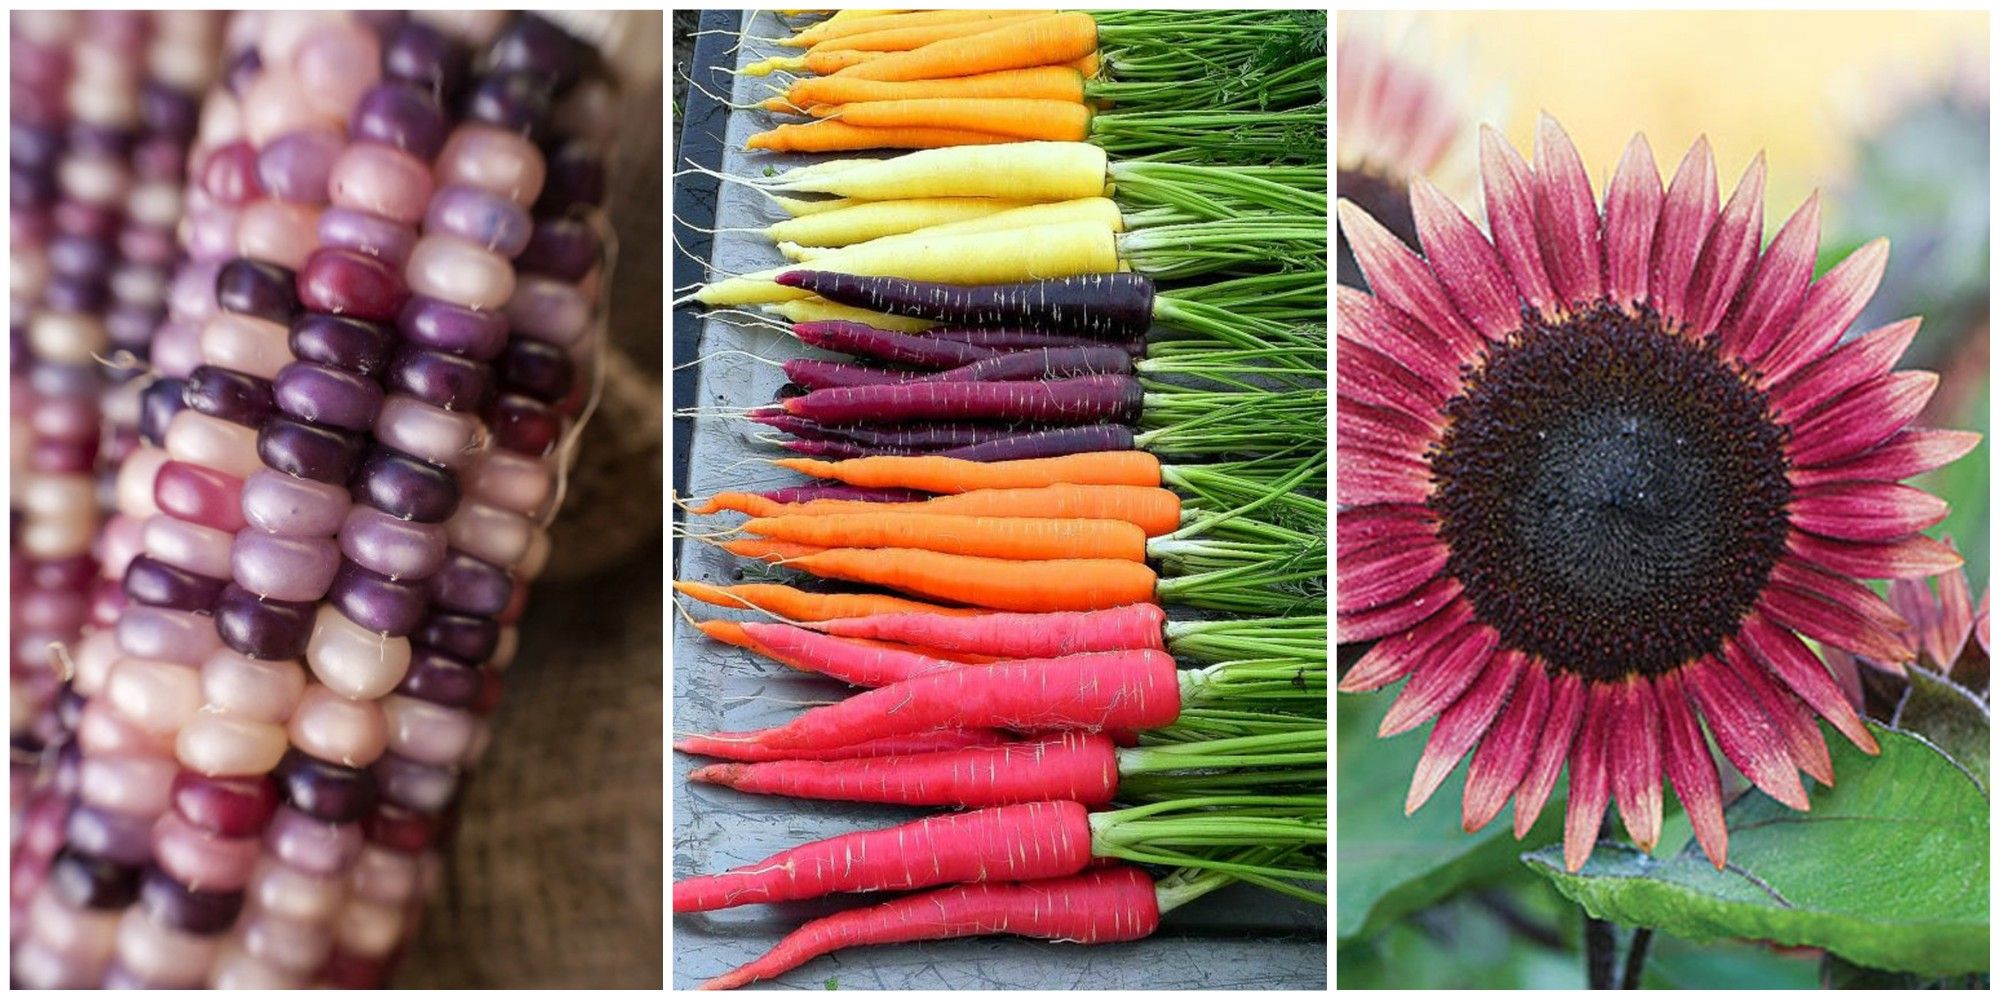 13 of the Coolest Seeds You Can Buy Unique Plants and Vegetables